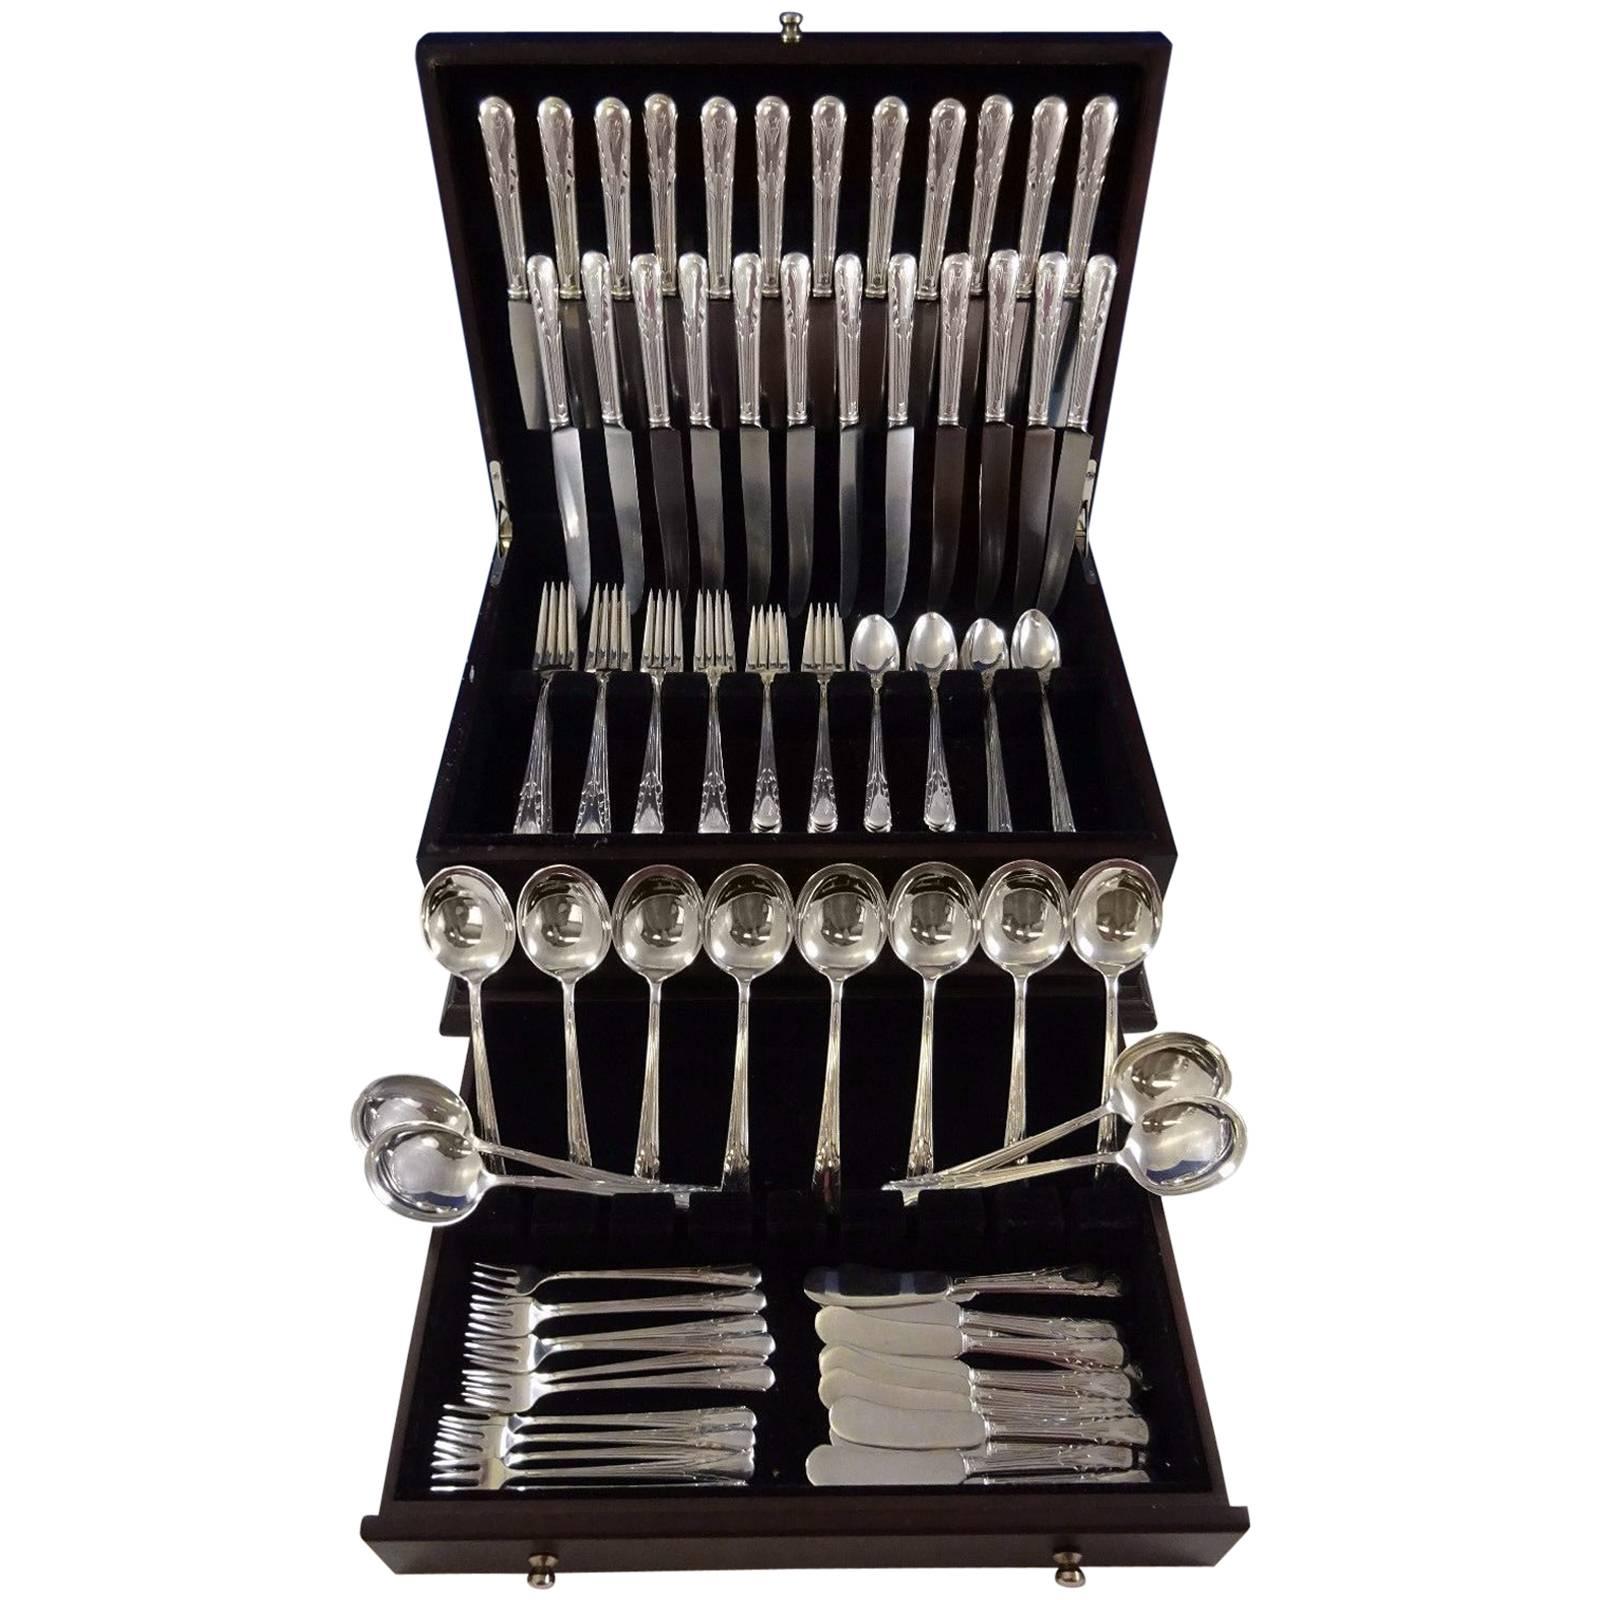 Orchid by International Sterling Silver Flatware Dinner Service Set 120 Pieces